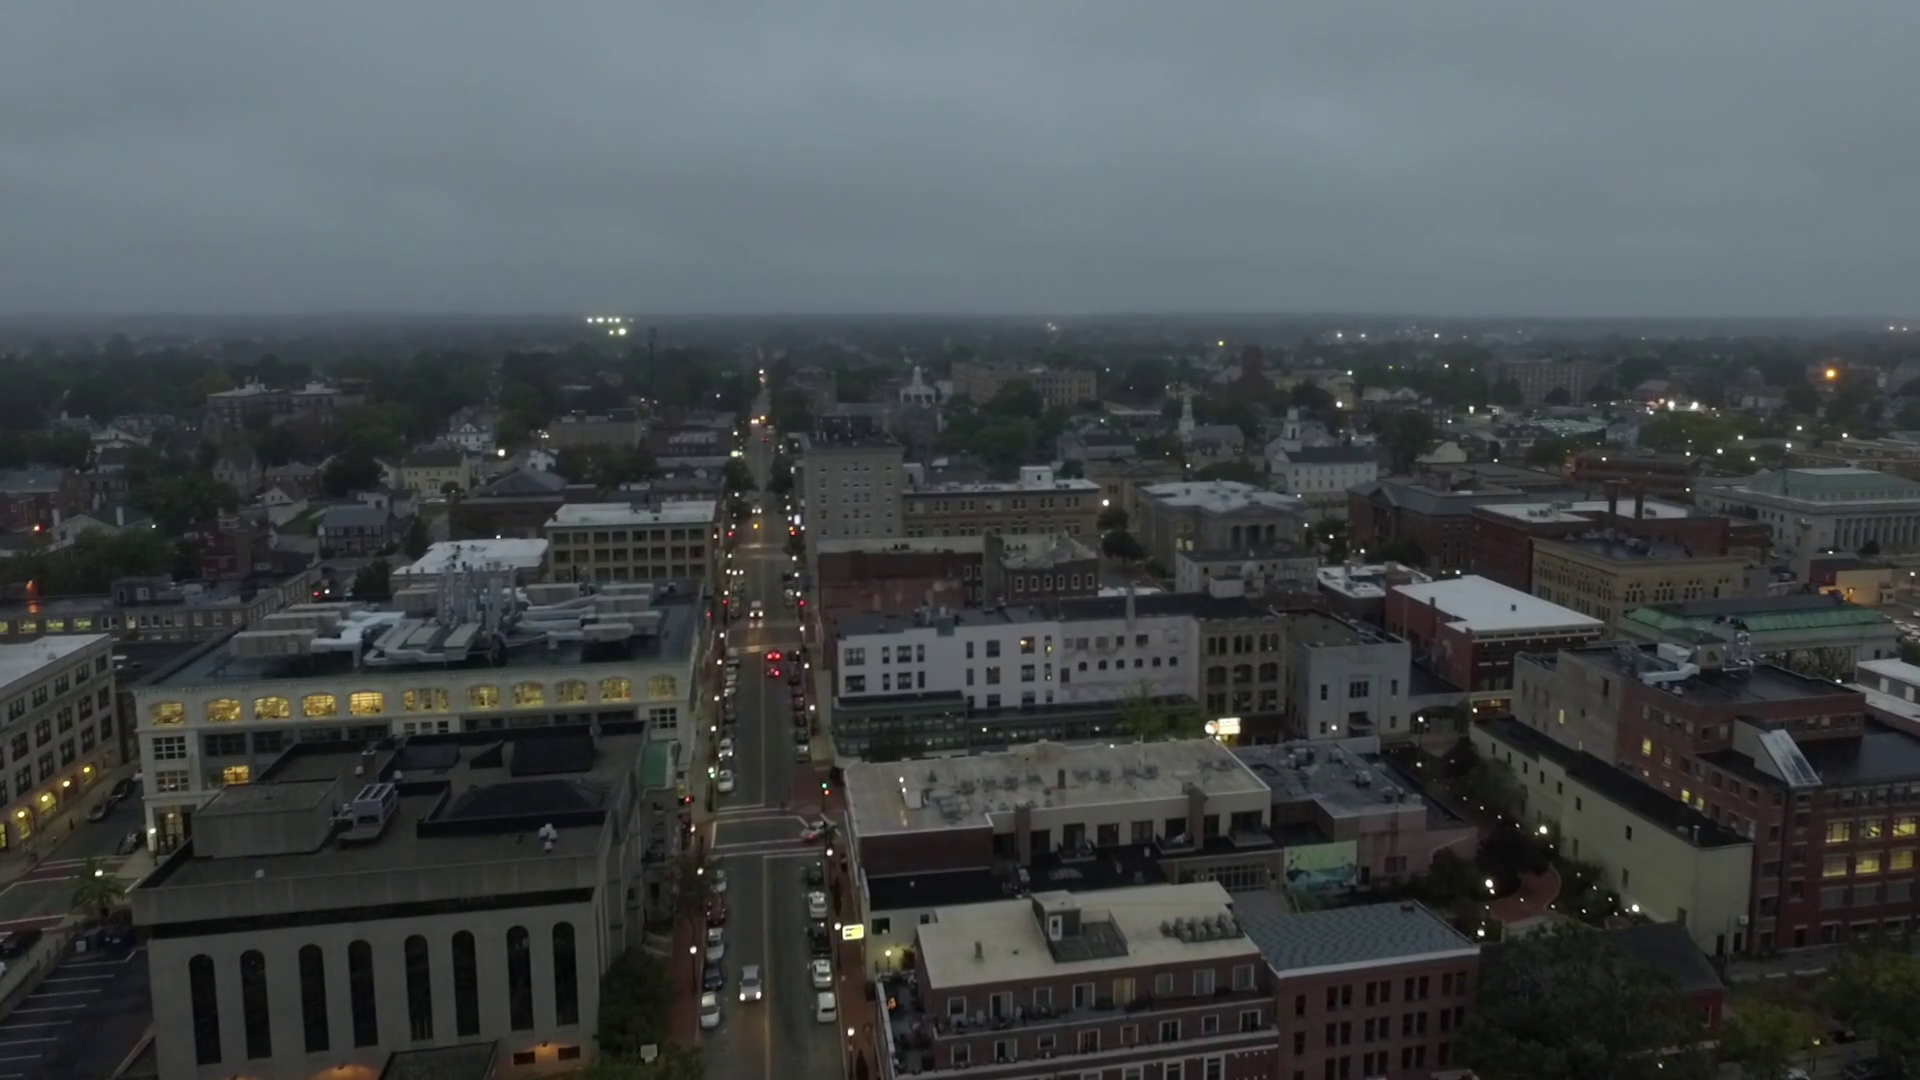 Footage of a Small Town at Dusk with a Cloudy/ Stormy Weather Stock ...